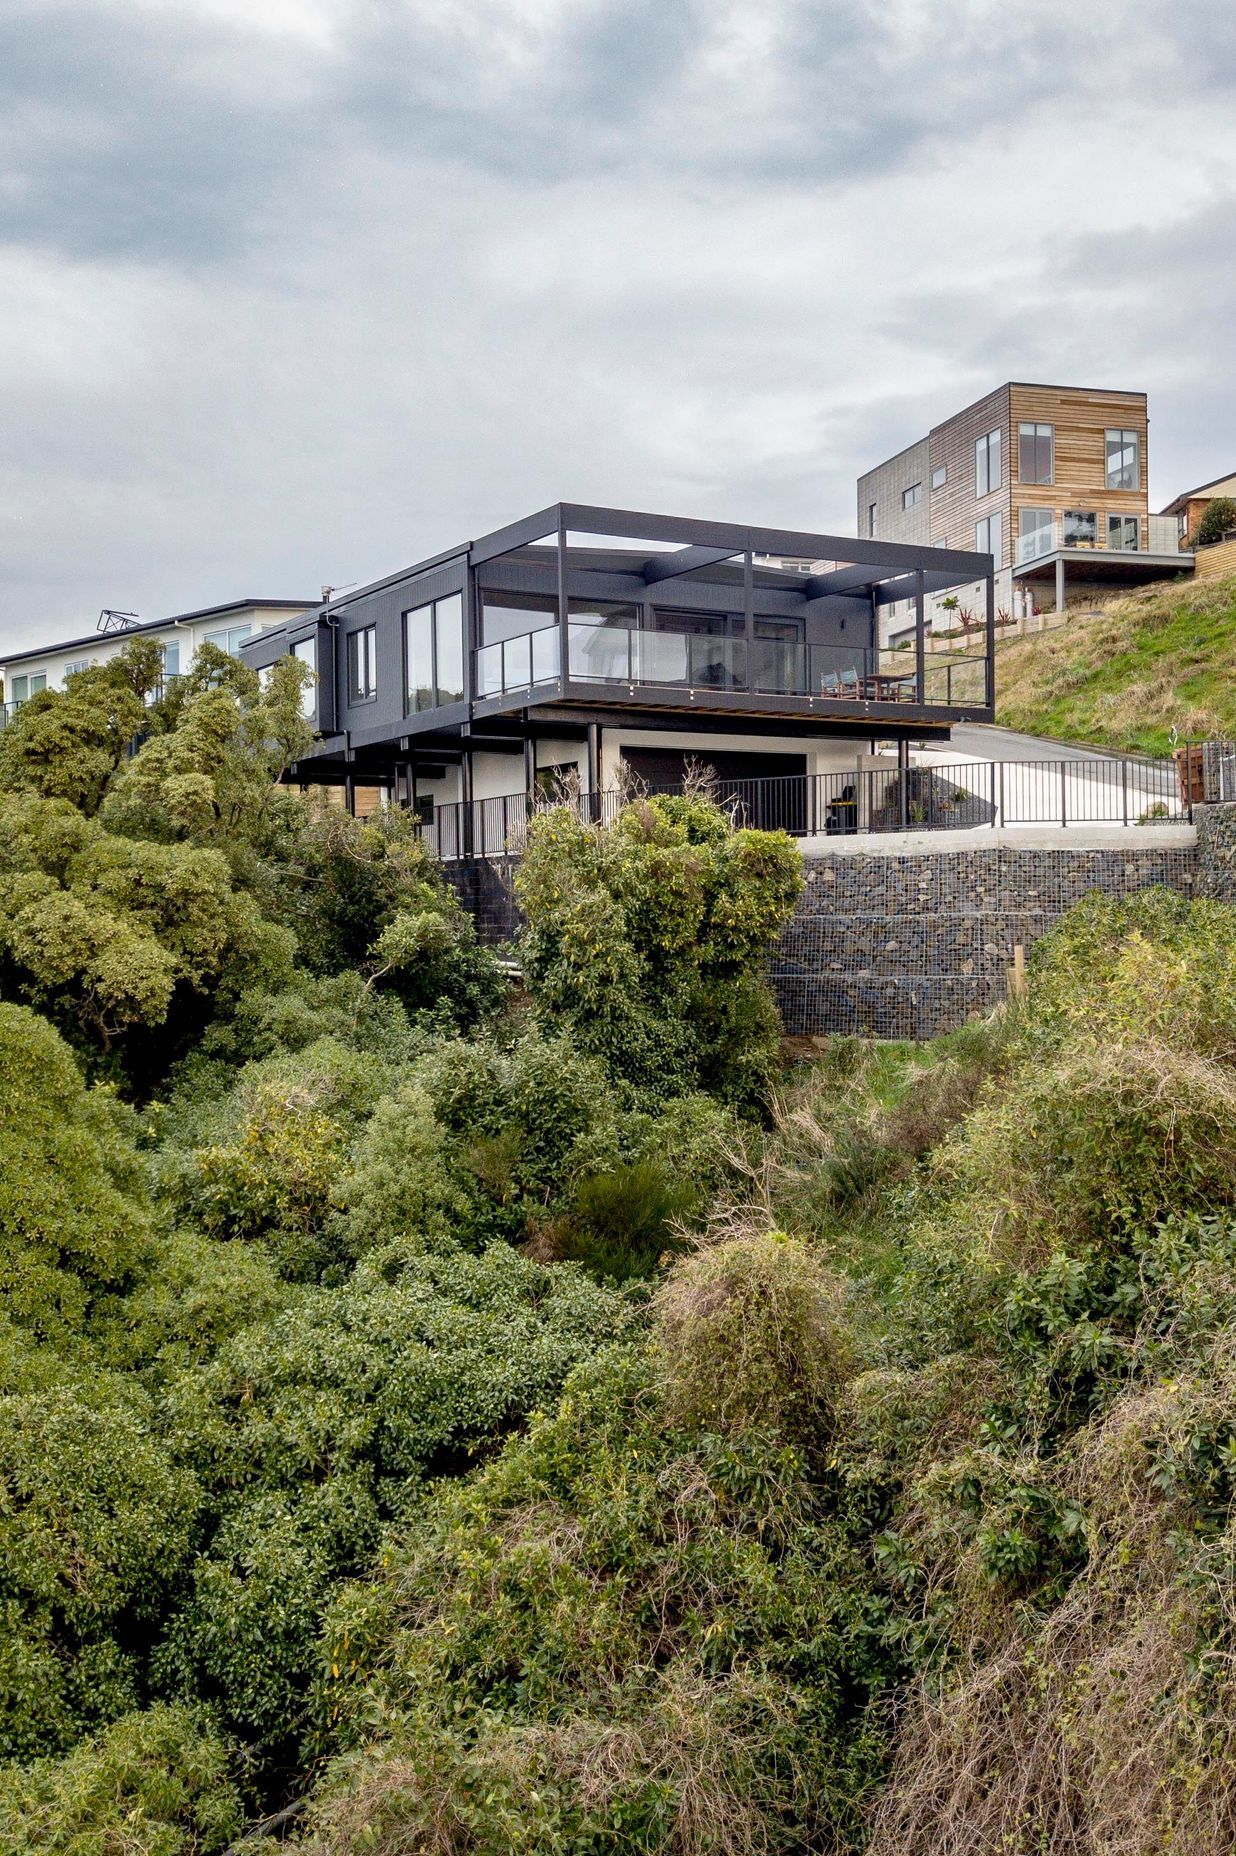 The house sits into the hillside, supported by a terraced gabion wall.